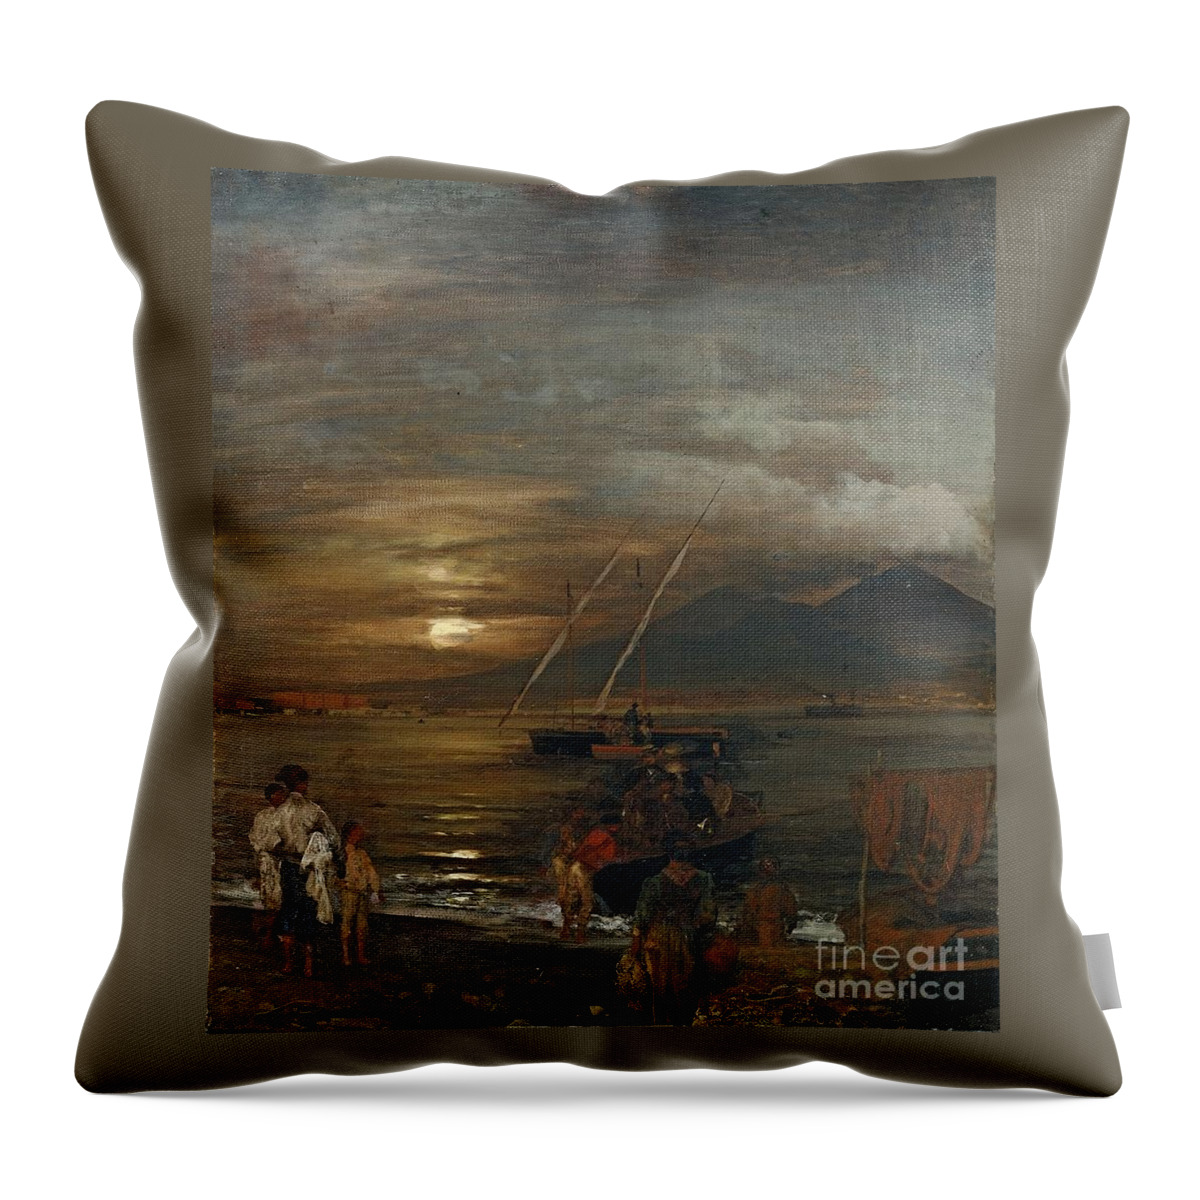 Oswald Achenbach Throw Pillow featuring the painting The Bay Of Naples In The Moonlight by MotionAge Designs